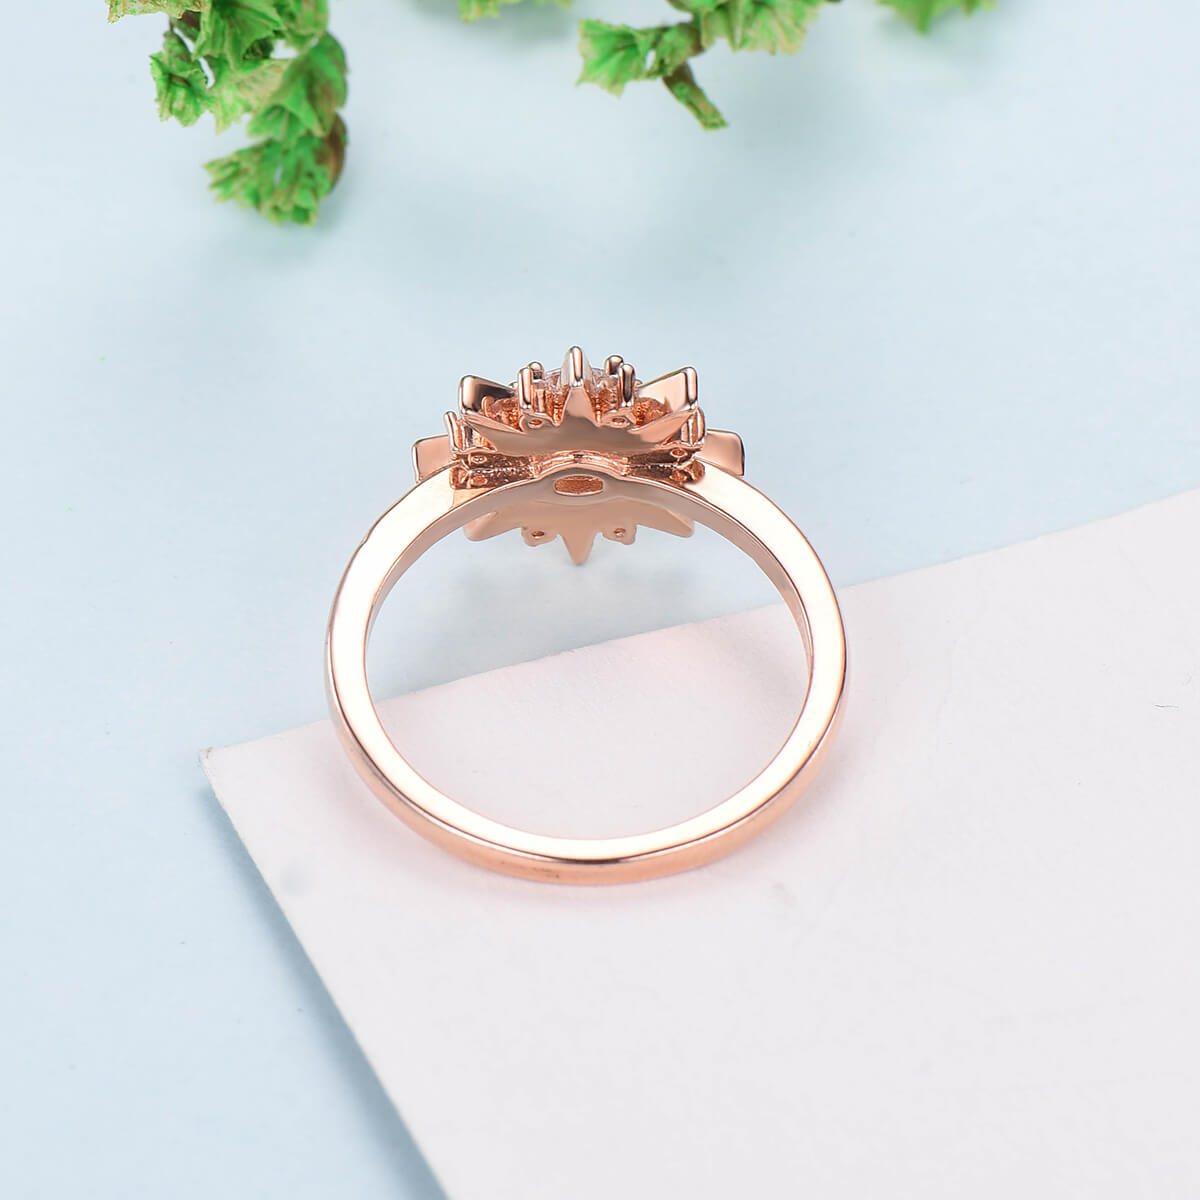 Vintage Galaxy Star Moissanite Engagement Ring Round Cut Rose Gold Art Deco Moissanite Stacking Promise Ring Handmade Proposal Gifts Women - PENFINE